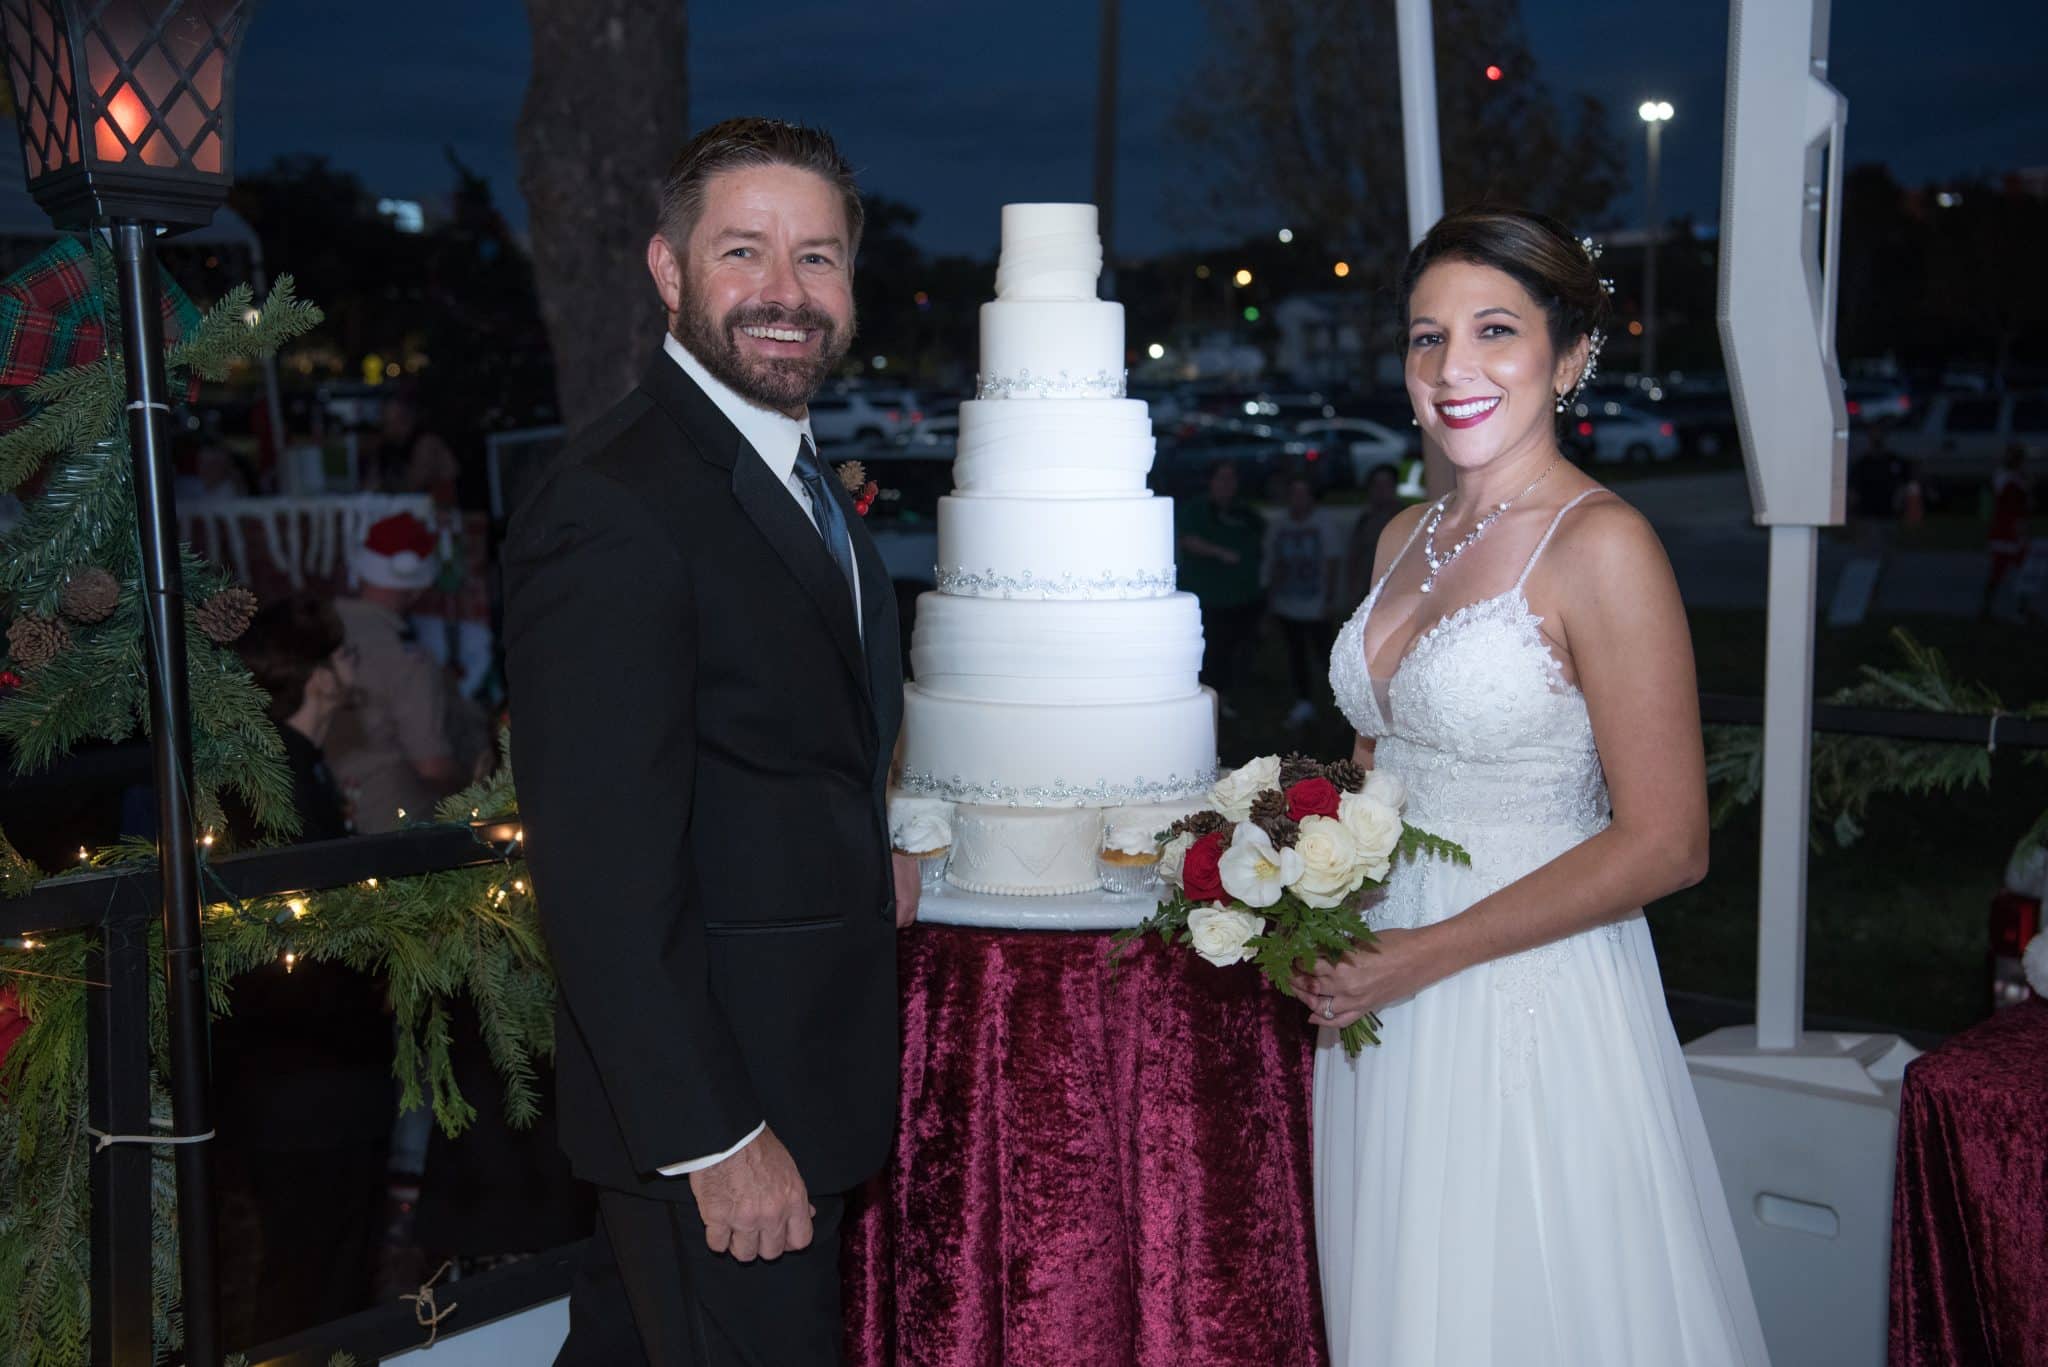 Couple stands on a parade float in wedding attire next to a 7 tiered wedding cake by Got Desserts Lakeland